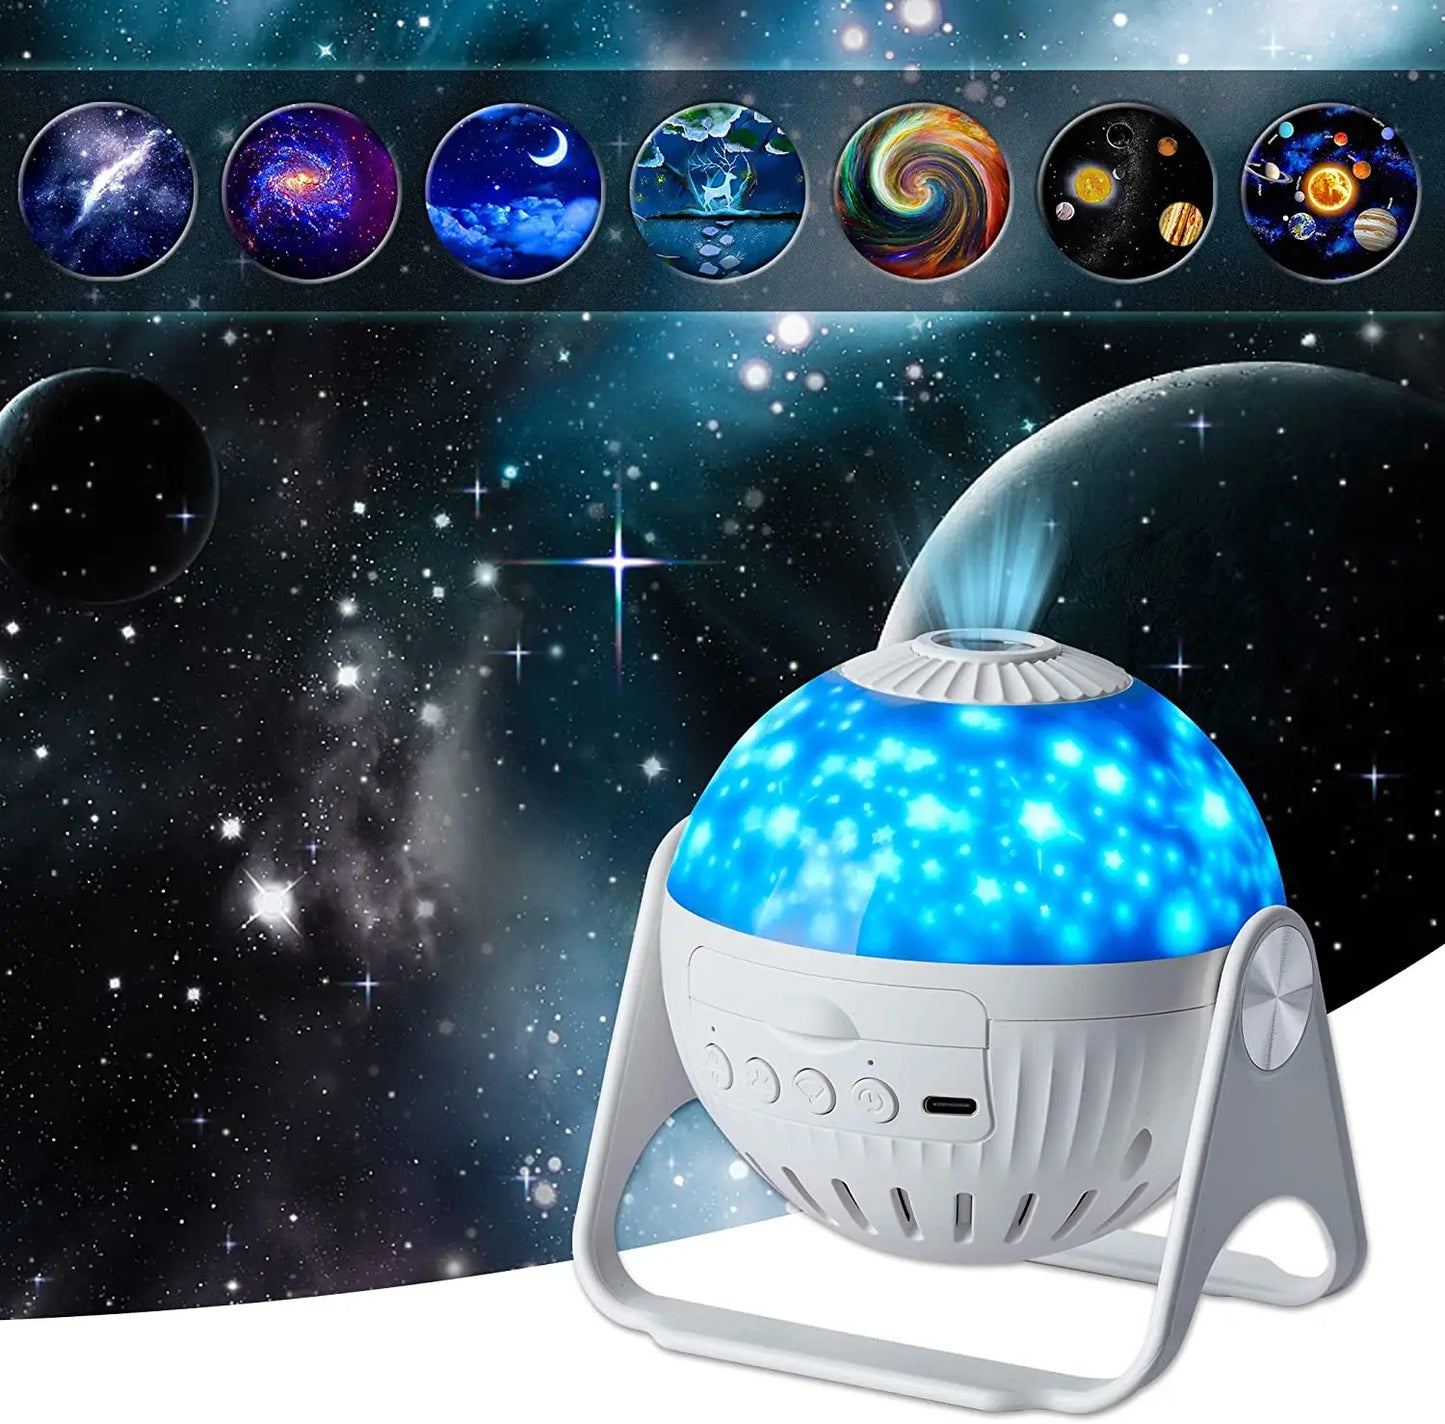 32 in 1 Bluetooth Planetarium Projector Night Light | Transform Your Space